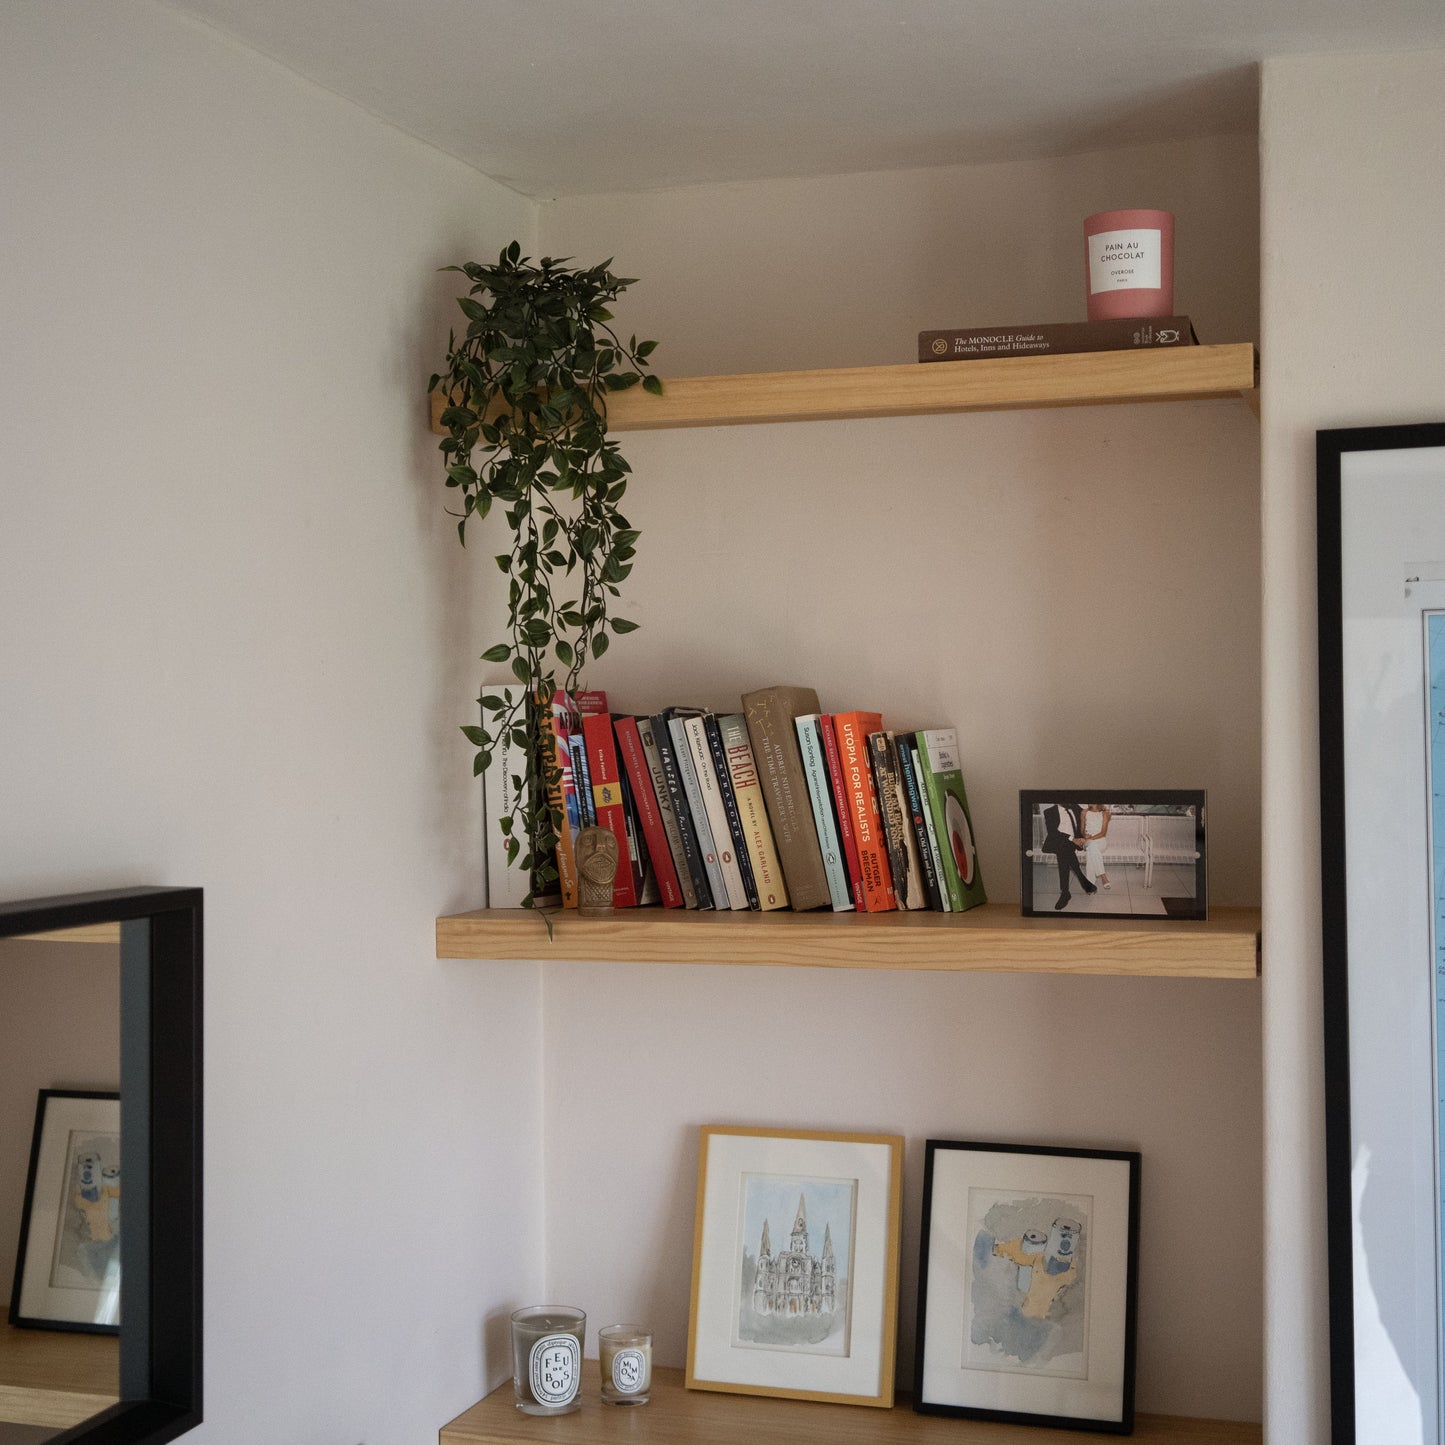 Solid Wood Alcove Floating Shelves - 90 cm by 28 cm